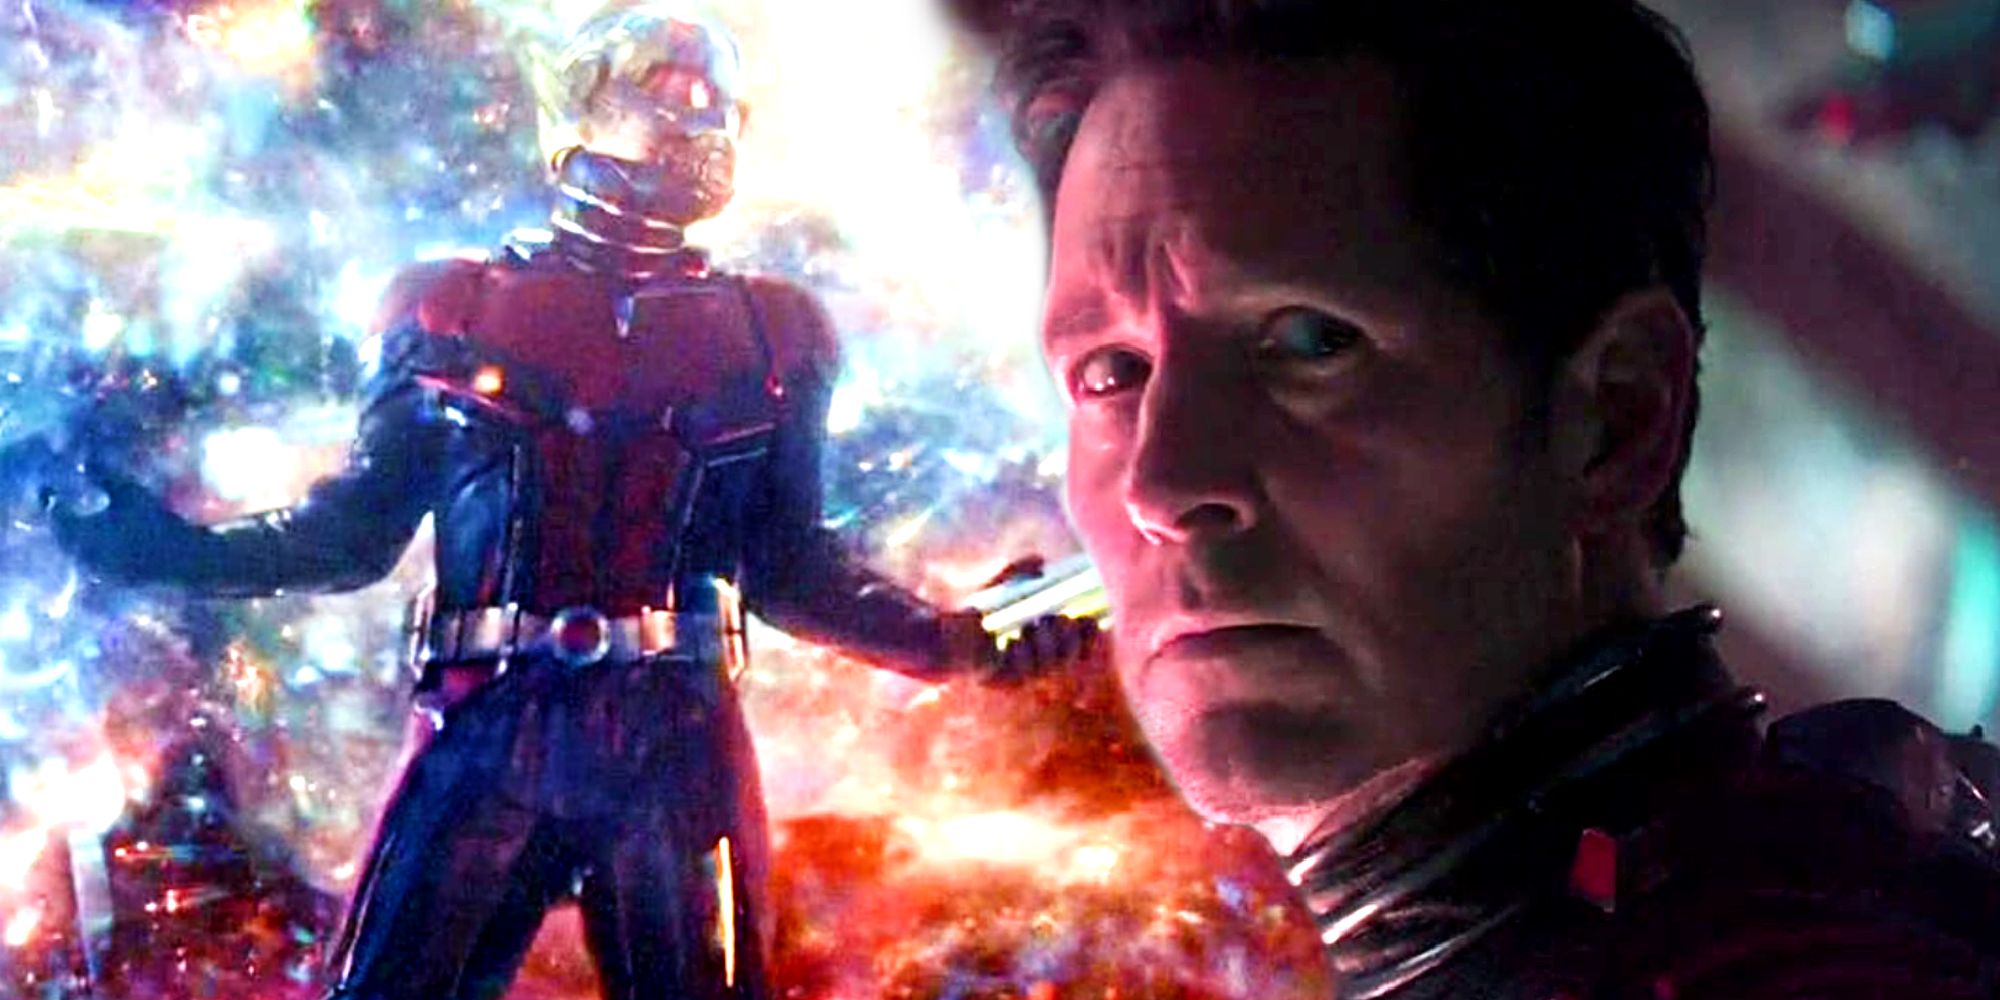 Ant-Man in the Quantum Realm in Quantumania and Avengers Endgame